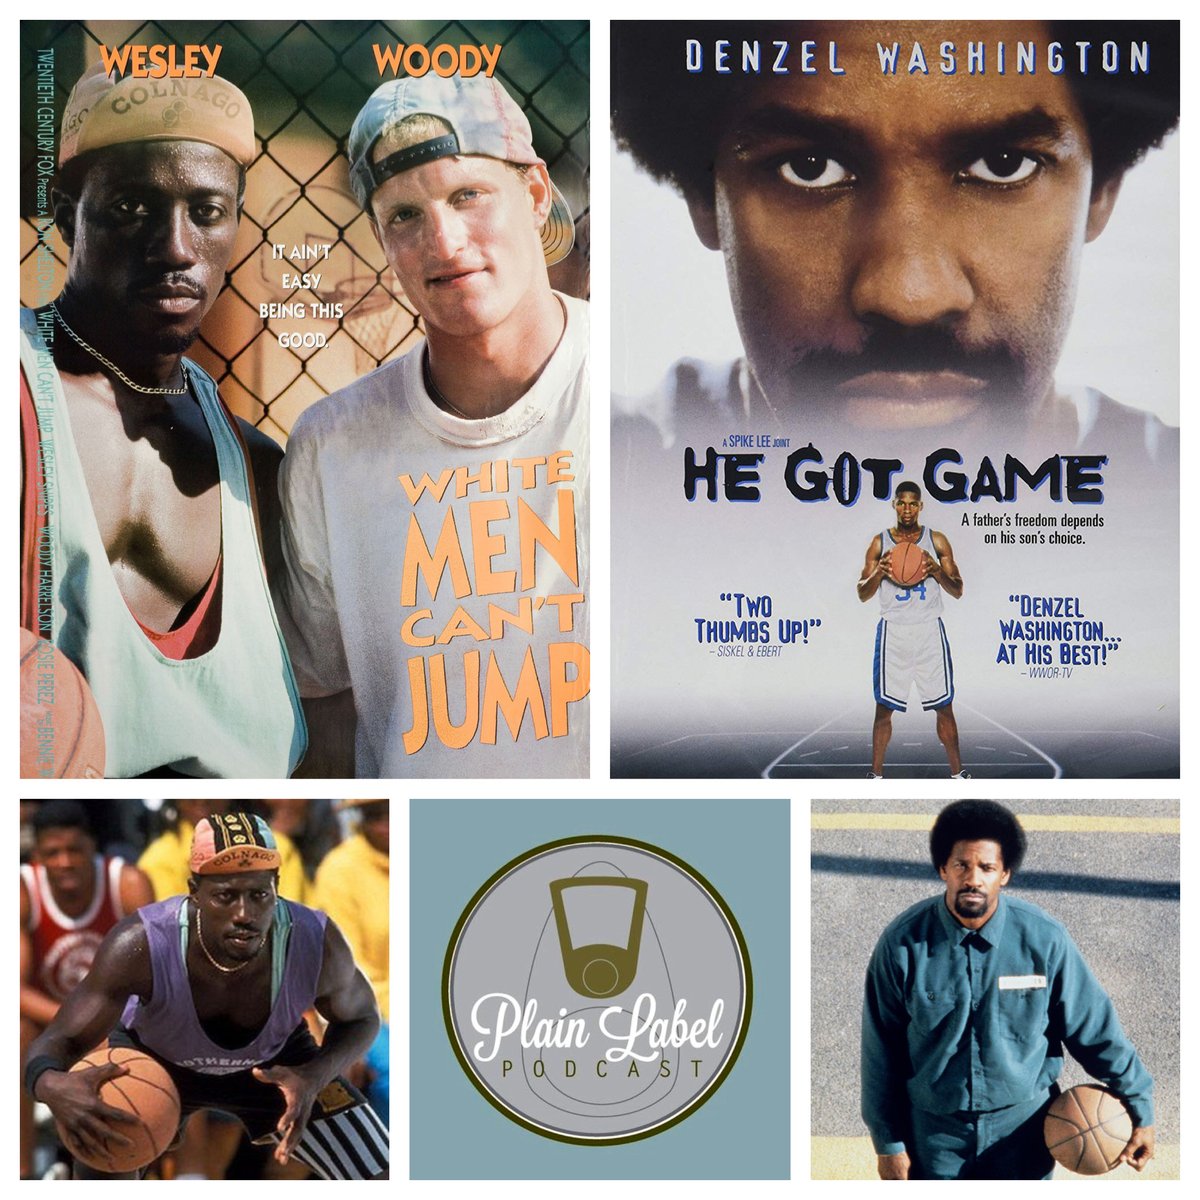 Plain Label Podcast V3E96 - March Madness Part 1 featuring @EricWilliams79 and @andrew_shaw23 #WhiteMenCantJump #HeGotGame #RonShelton #SpikeLee #WoodyHarrelson #WesleySnipes #DenzelWashington #MovieReviews #MoviePodcast
movienoise.com/blog/2020/03/2…